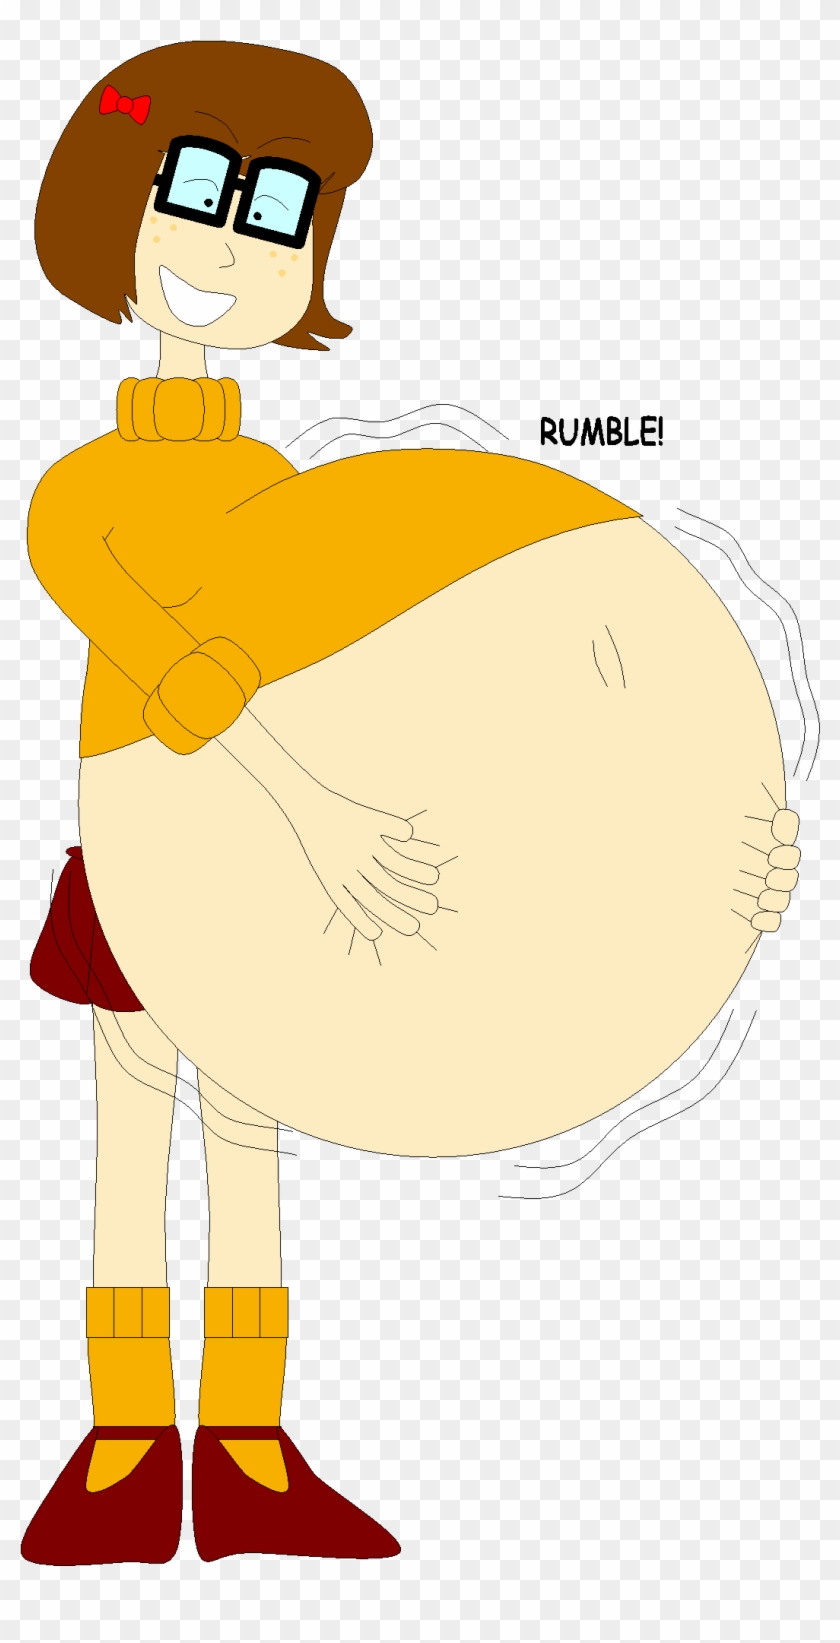 Velma's Belly After Eating Too Much By Angry-signs - After Eating Too Much #871256